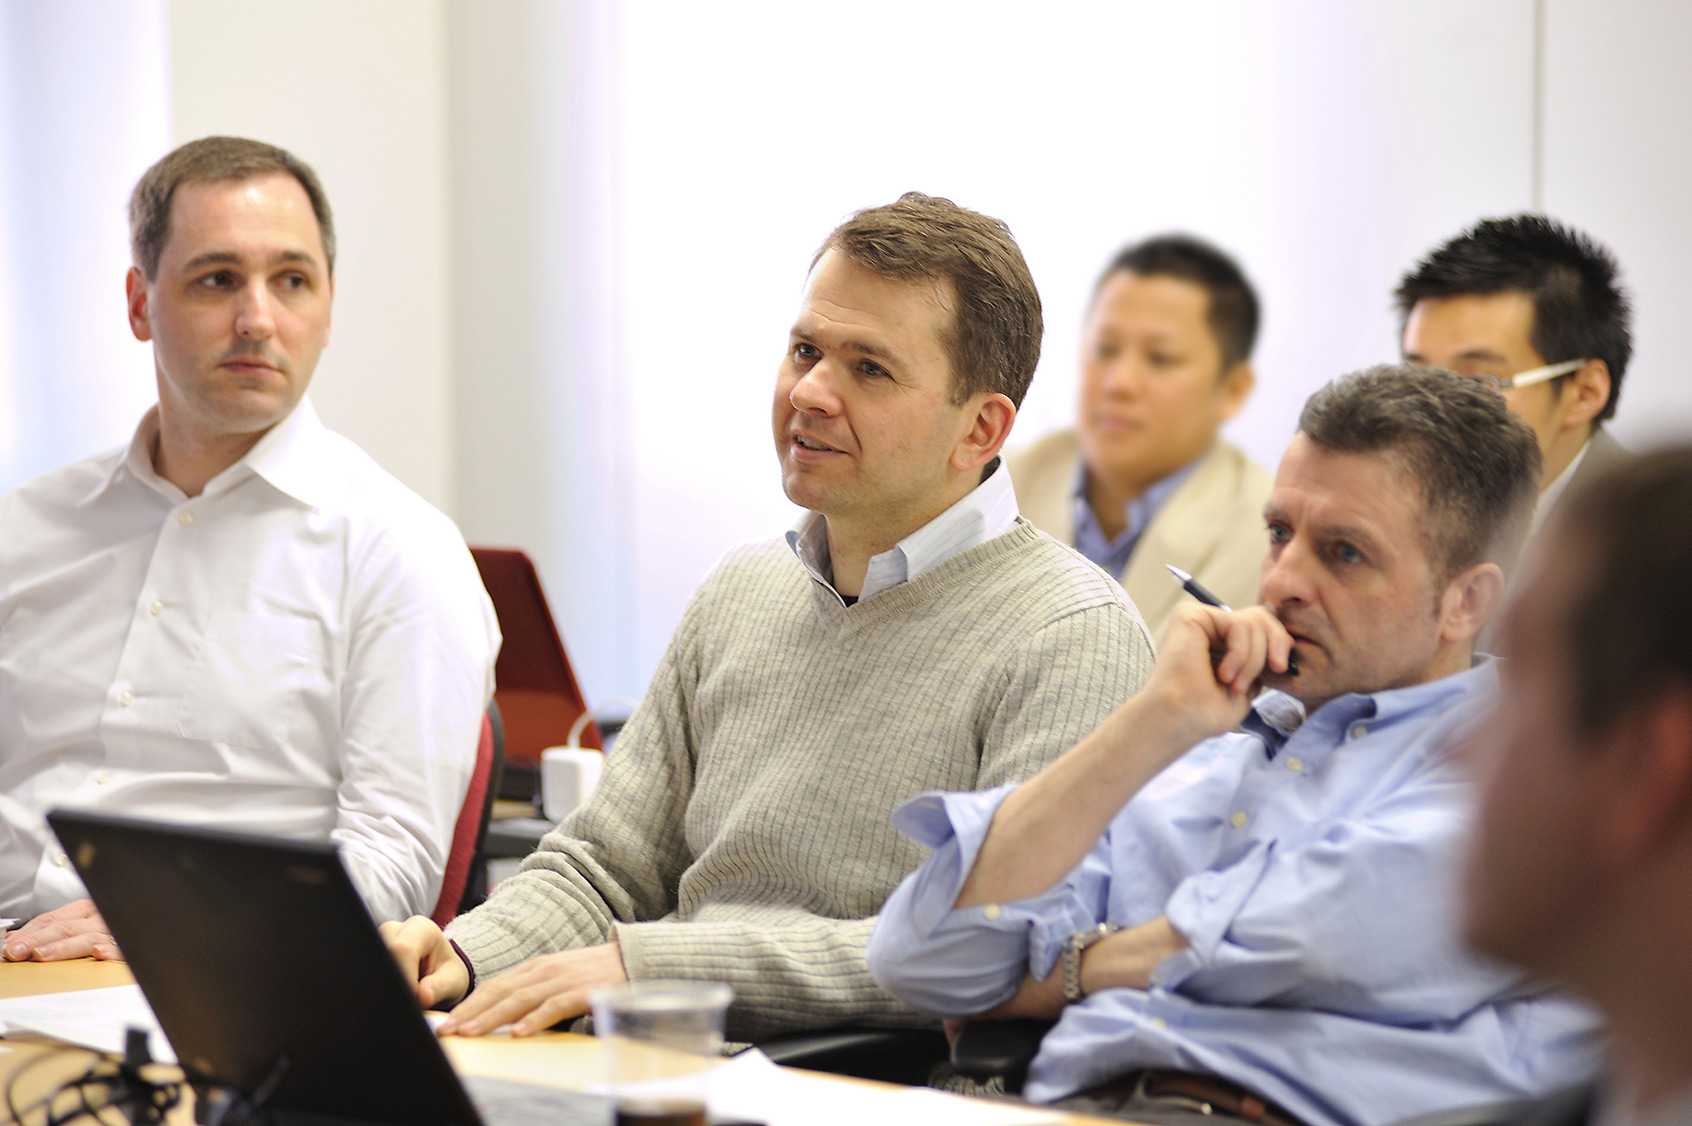 Photo: a scene from EMBA class